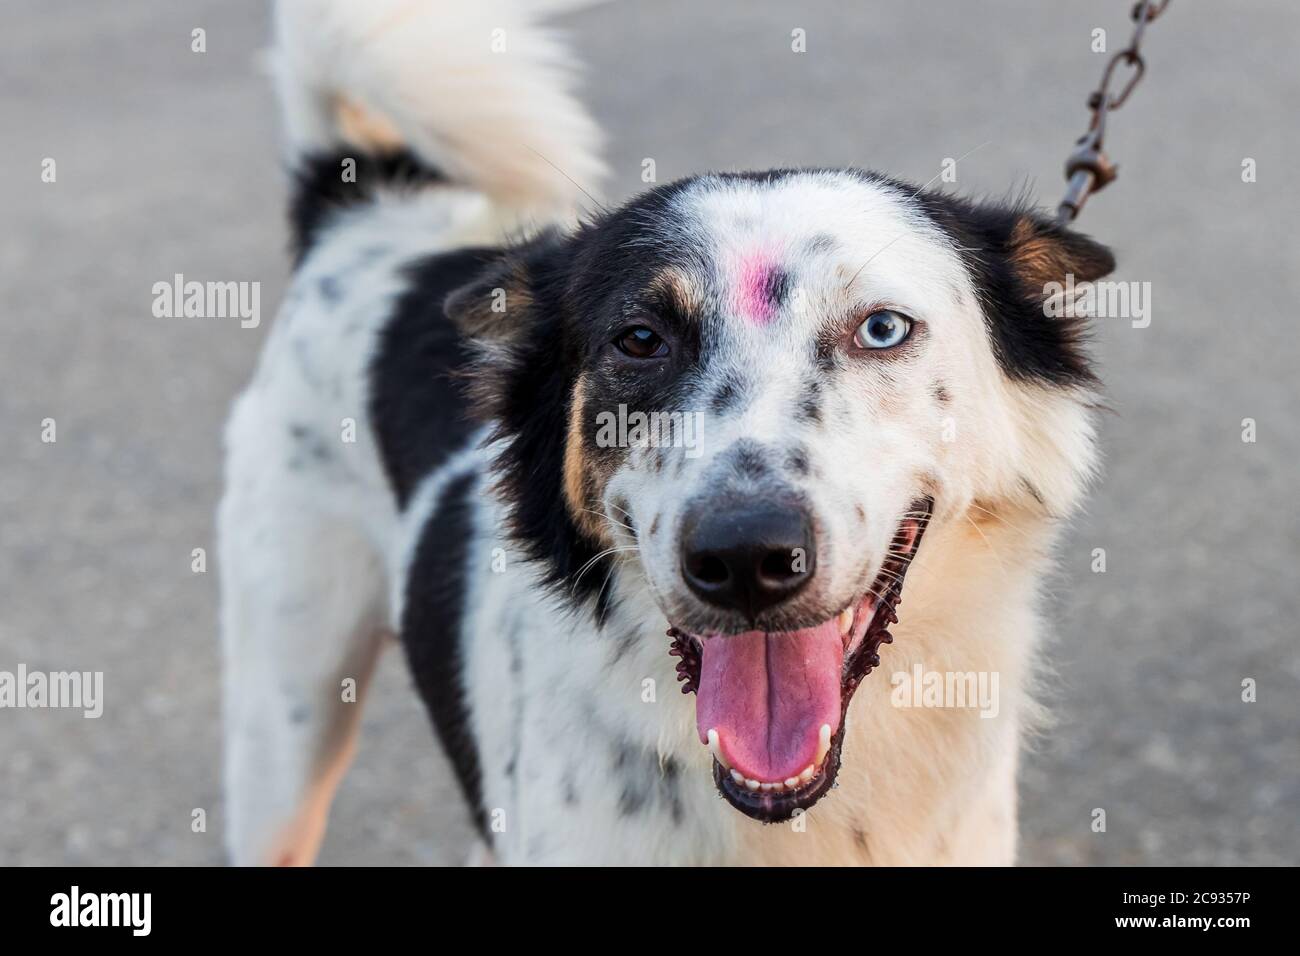 Cross between Border Collie and Siberian Husky, the dog has a rare and uncommon condition in which the eyes have different colors. Stock Photo